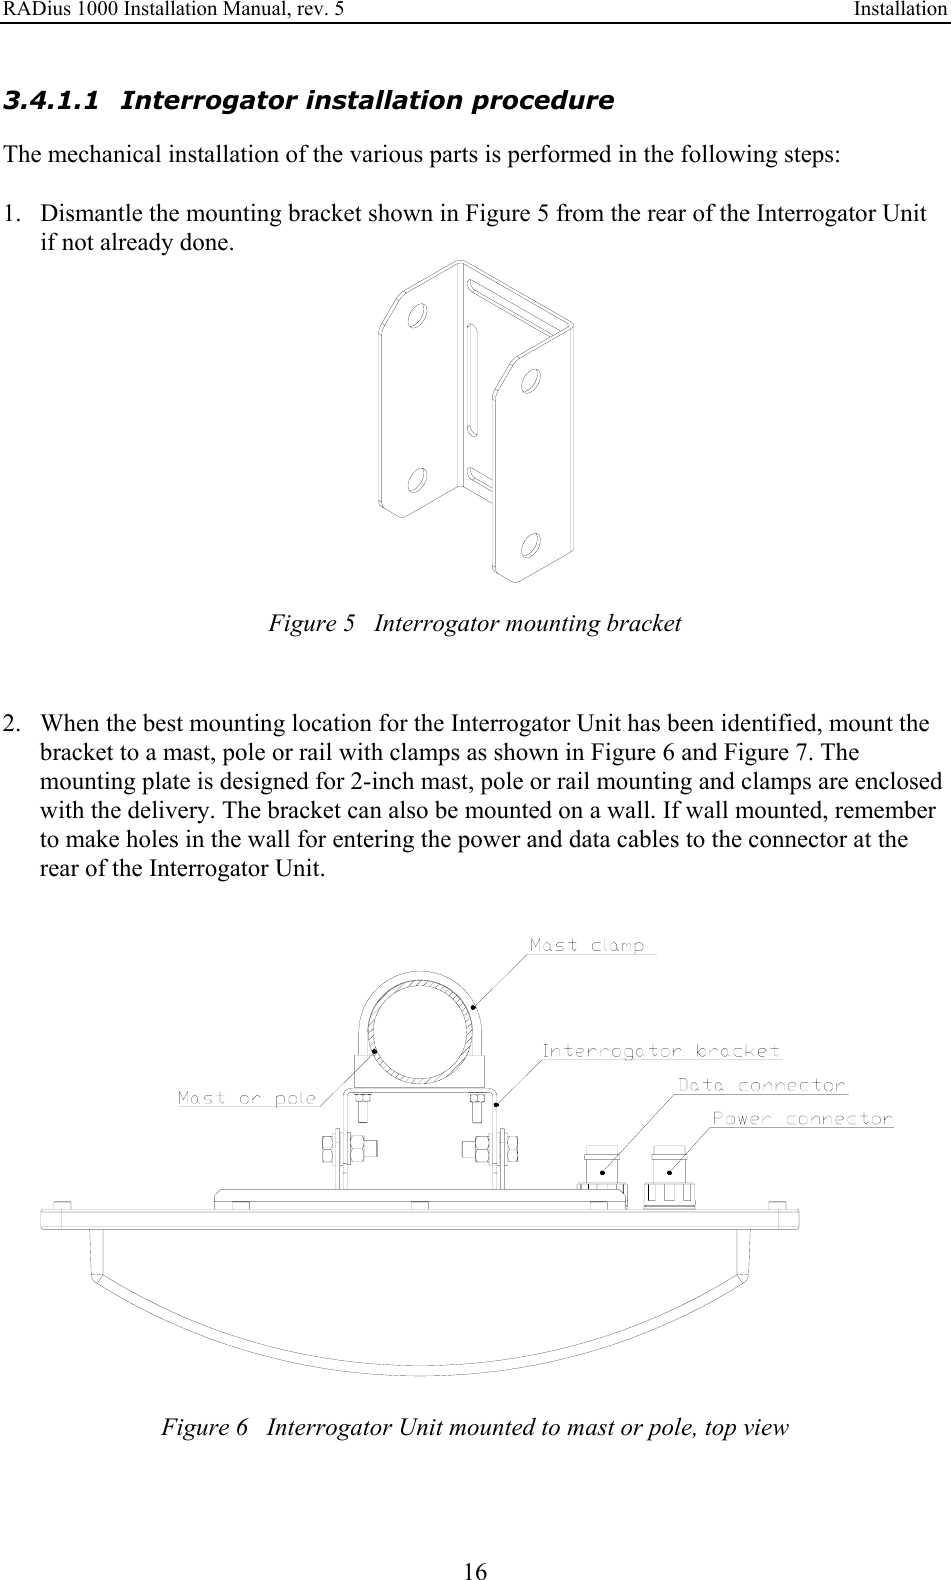 RADius 1000 Installation Manual, rev. 5    Installation 16 3.4.1.1 Interrogator installation procedure The mechanical installation of the various parts is performed in the following steps:  1. Dismantle the mounting bracket shown in Figure 5 from the rear of the Interrogator Unit if not already done.  Figure 5   Interrogator mounting bracket   2. When the best mounting location for the Interrogator Unit has been identified, mount the bracket to a mast, pole or rail with clamps as shown in Figure 6 and Figure 7. The mounting plate is designed for 2-inch mast, pole or rail mounting and clamps are enclosed with the delivery. The bracket can also be mounted on a wall. If wall mounted, remember to make holes in the wall for entering the power and data cables to the connector at the rear of the Interrogator Unit.   Figure 6   Interrogator Unit mounted to mast or pole, top view  